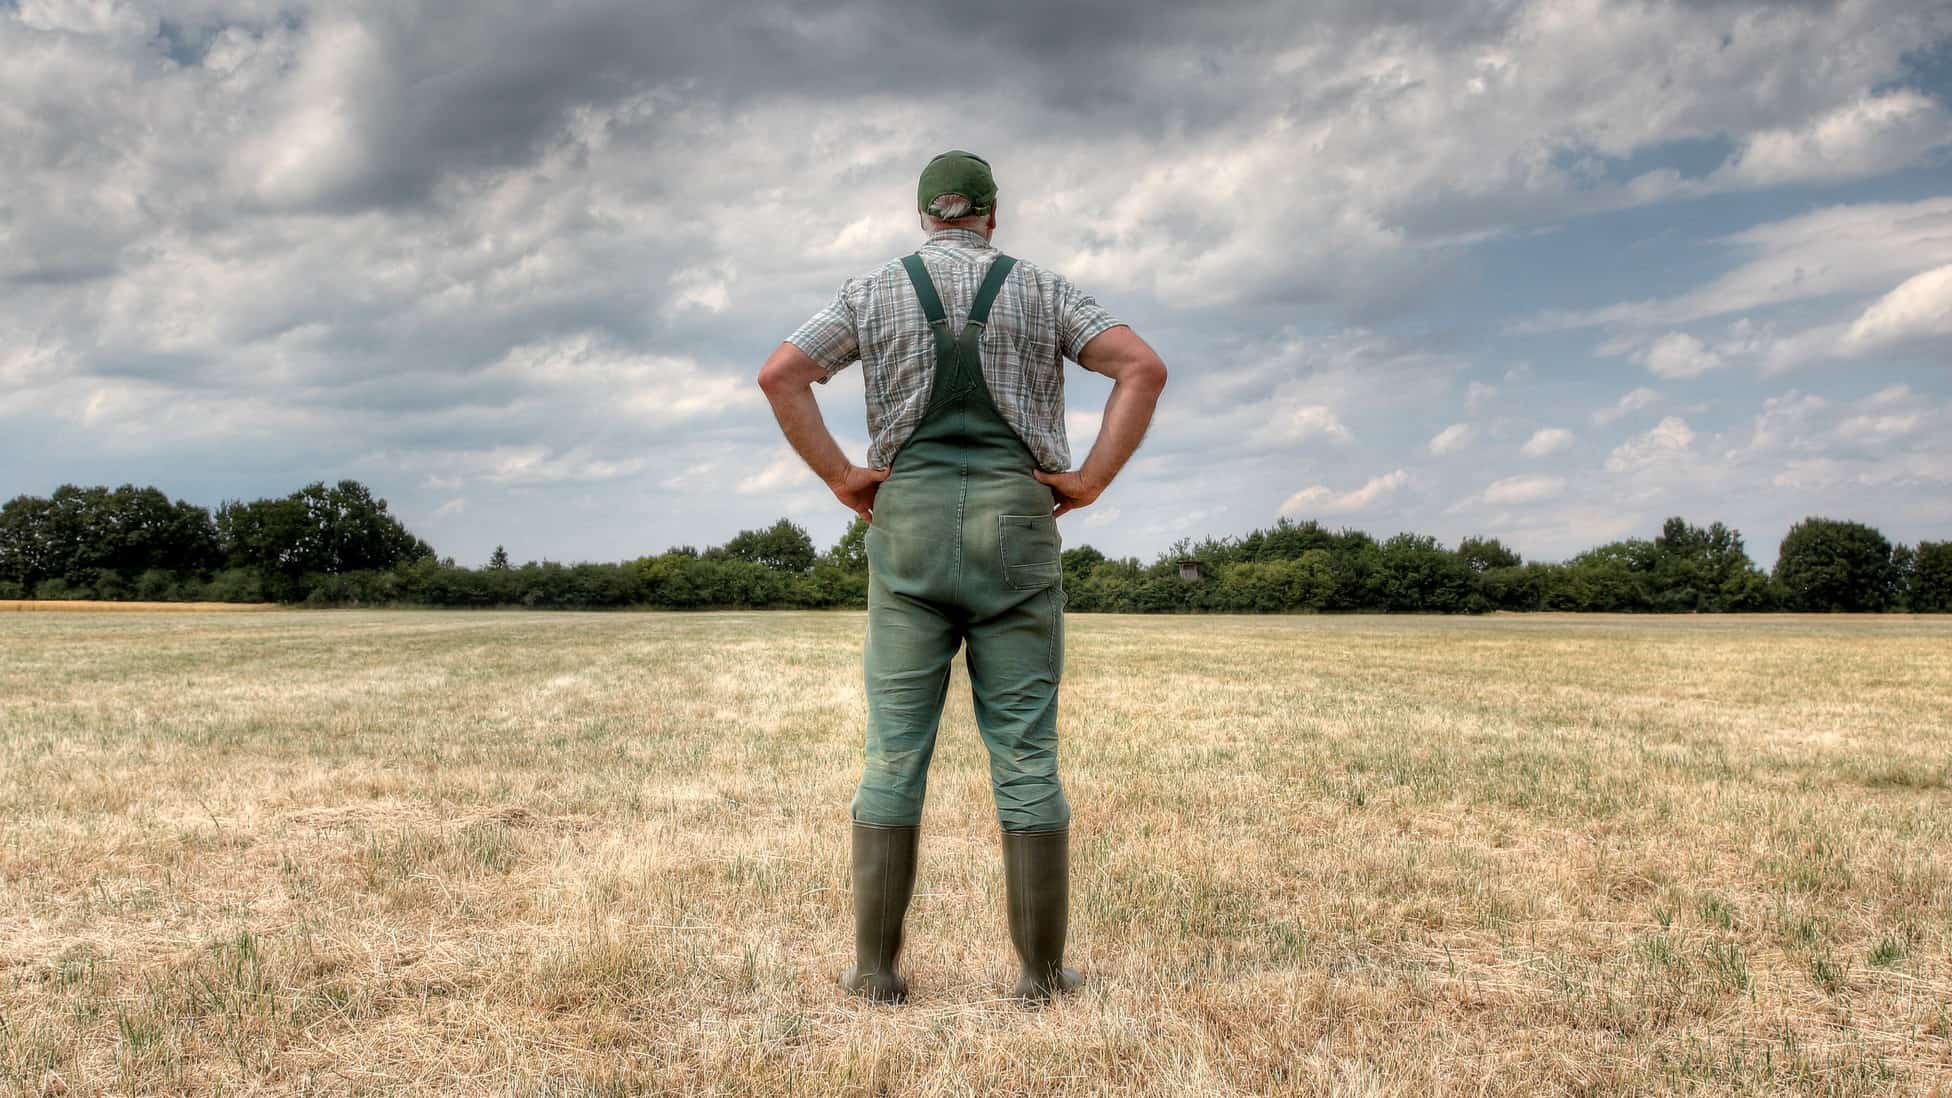 A farmer stands in a field of dry grass with hands on hips and looking to the sky for rain, waiting for the drought to end.